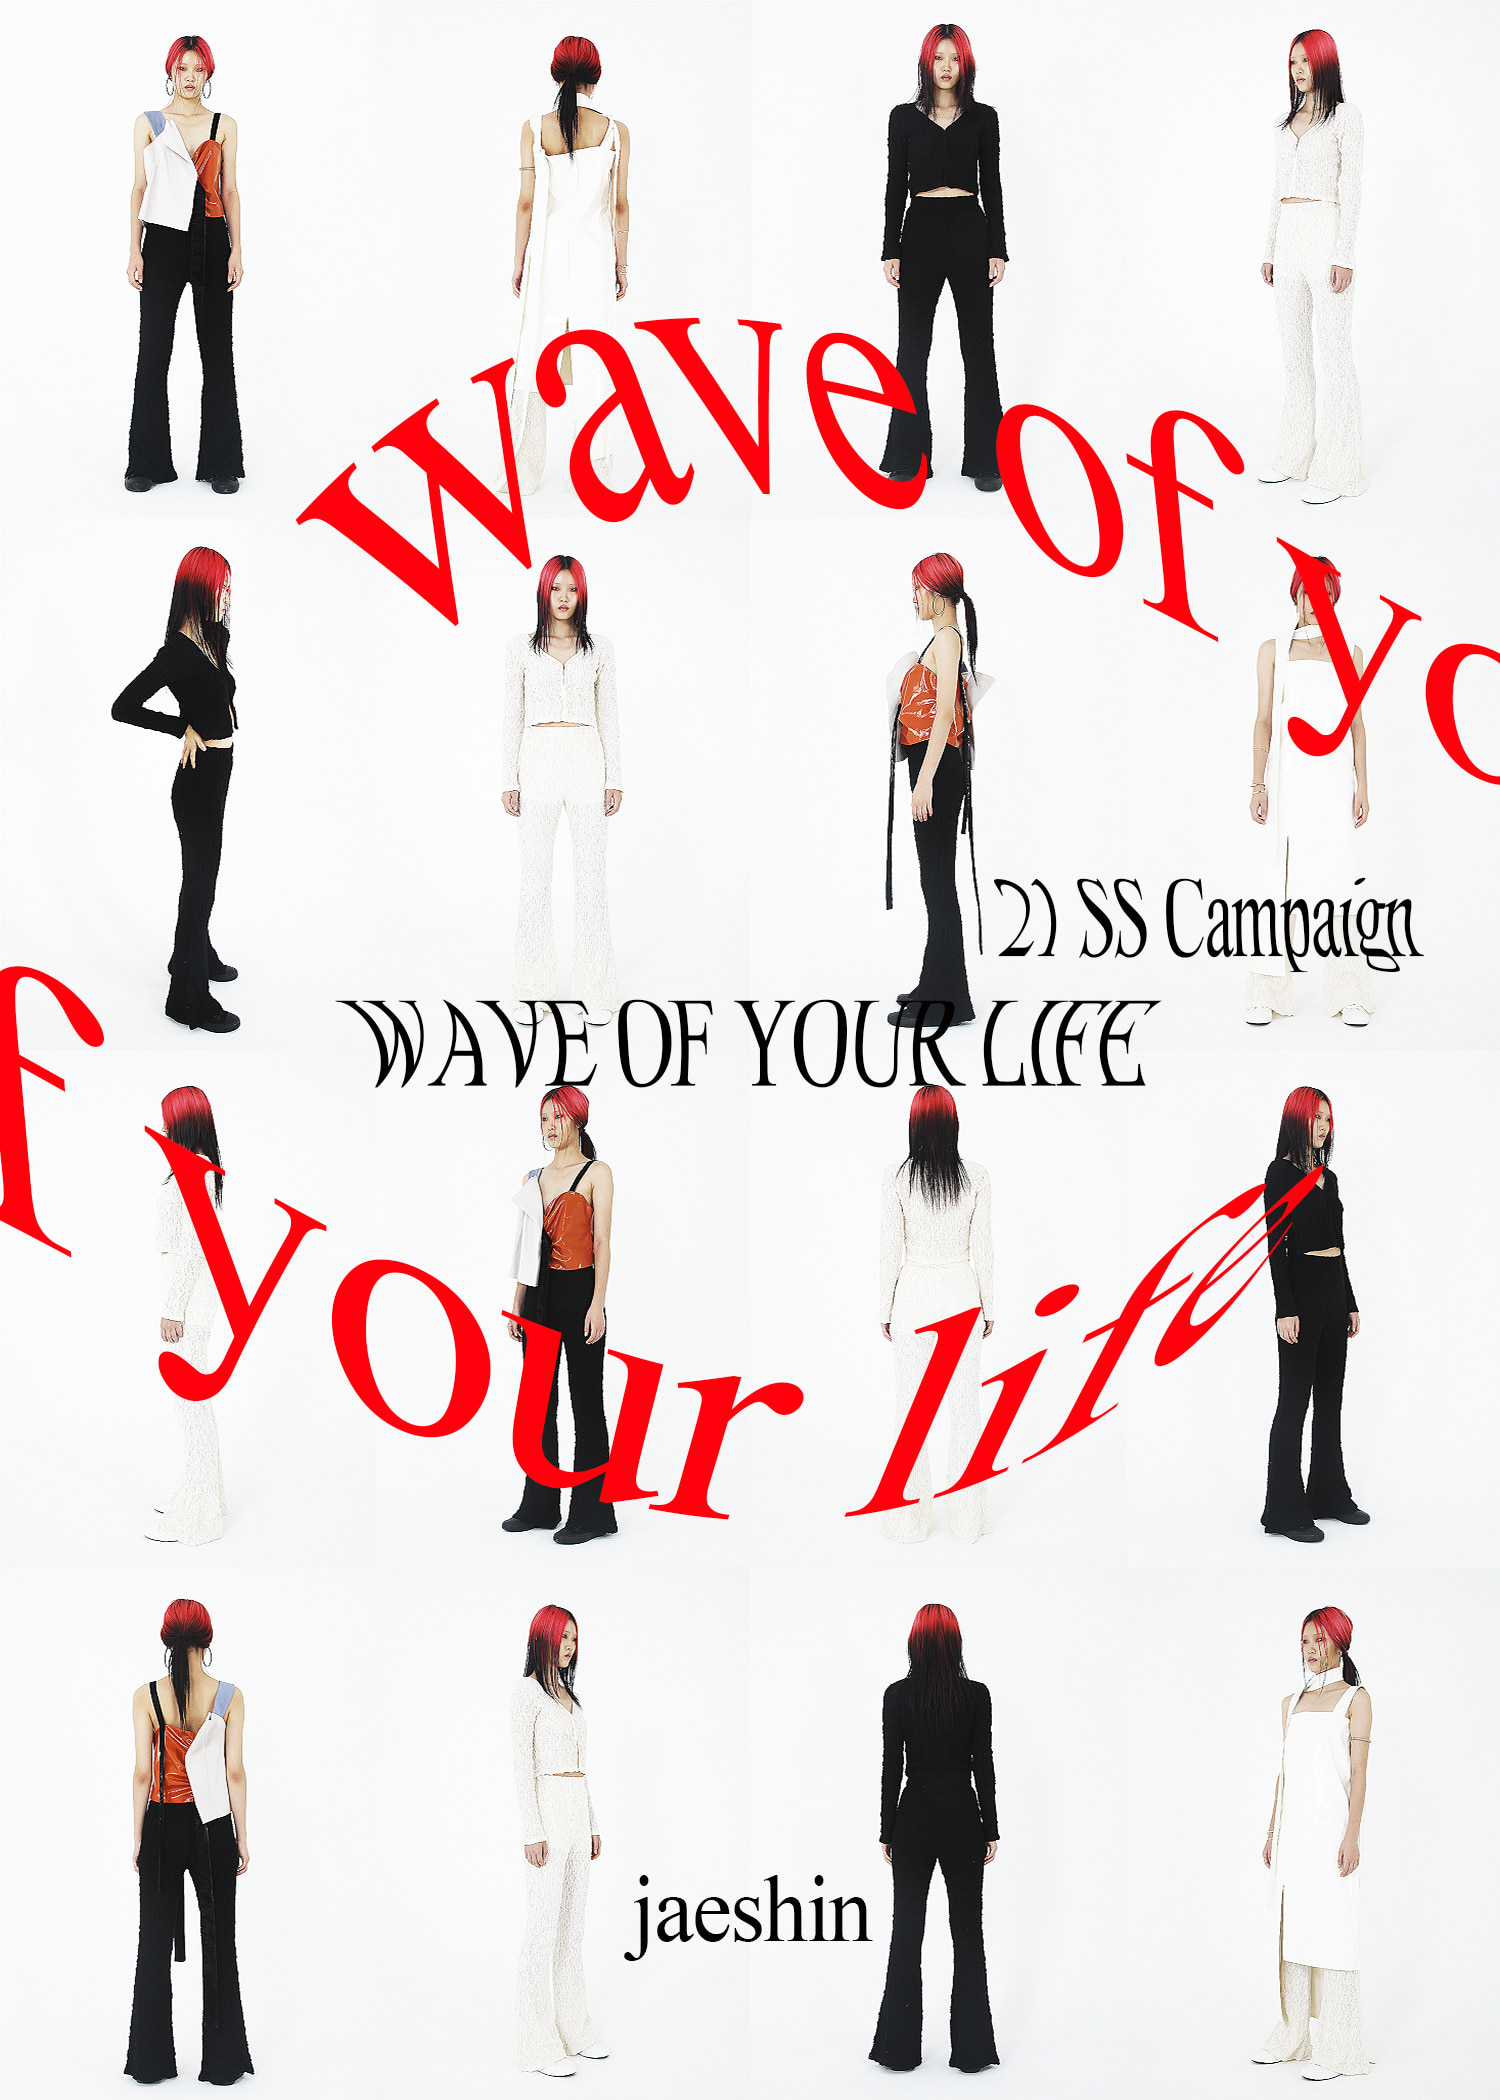 Wave Of Your life